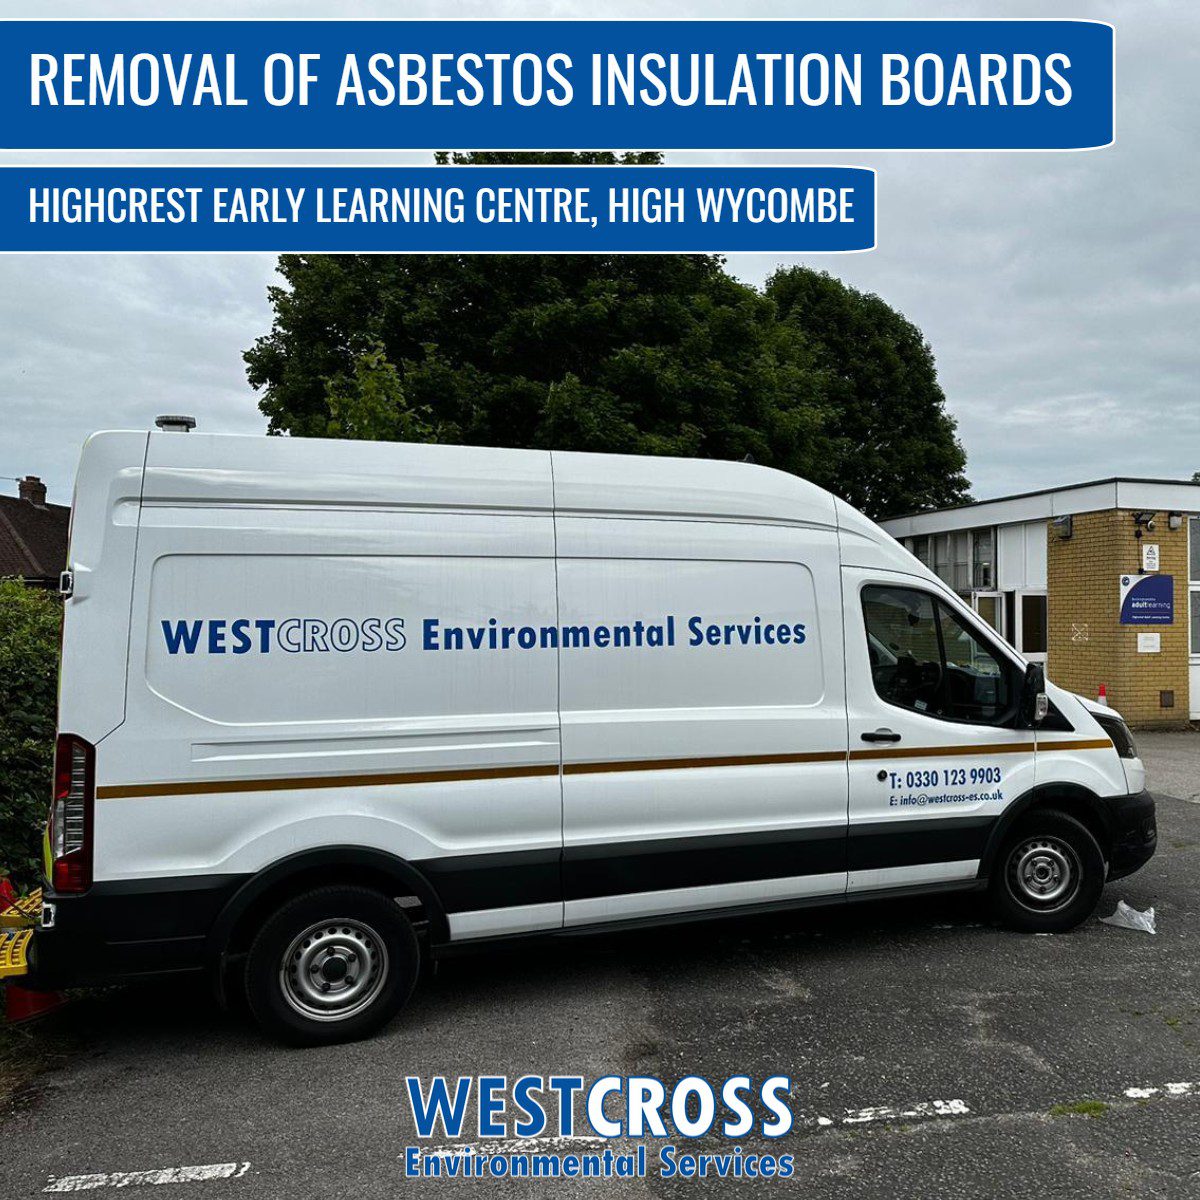 Removal of asbestos insulation boards